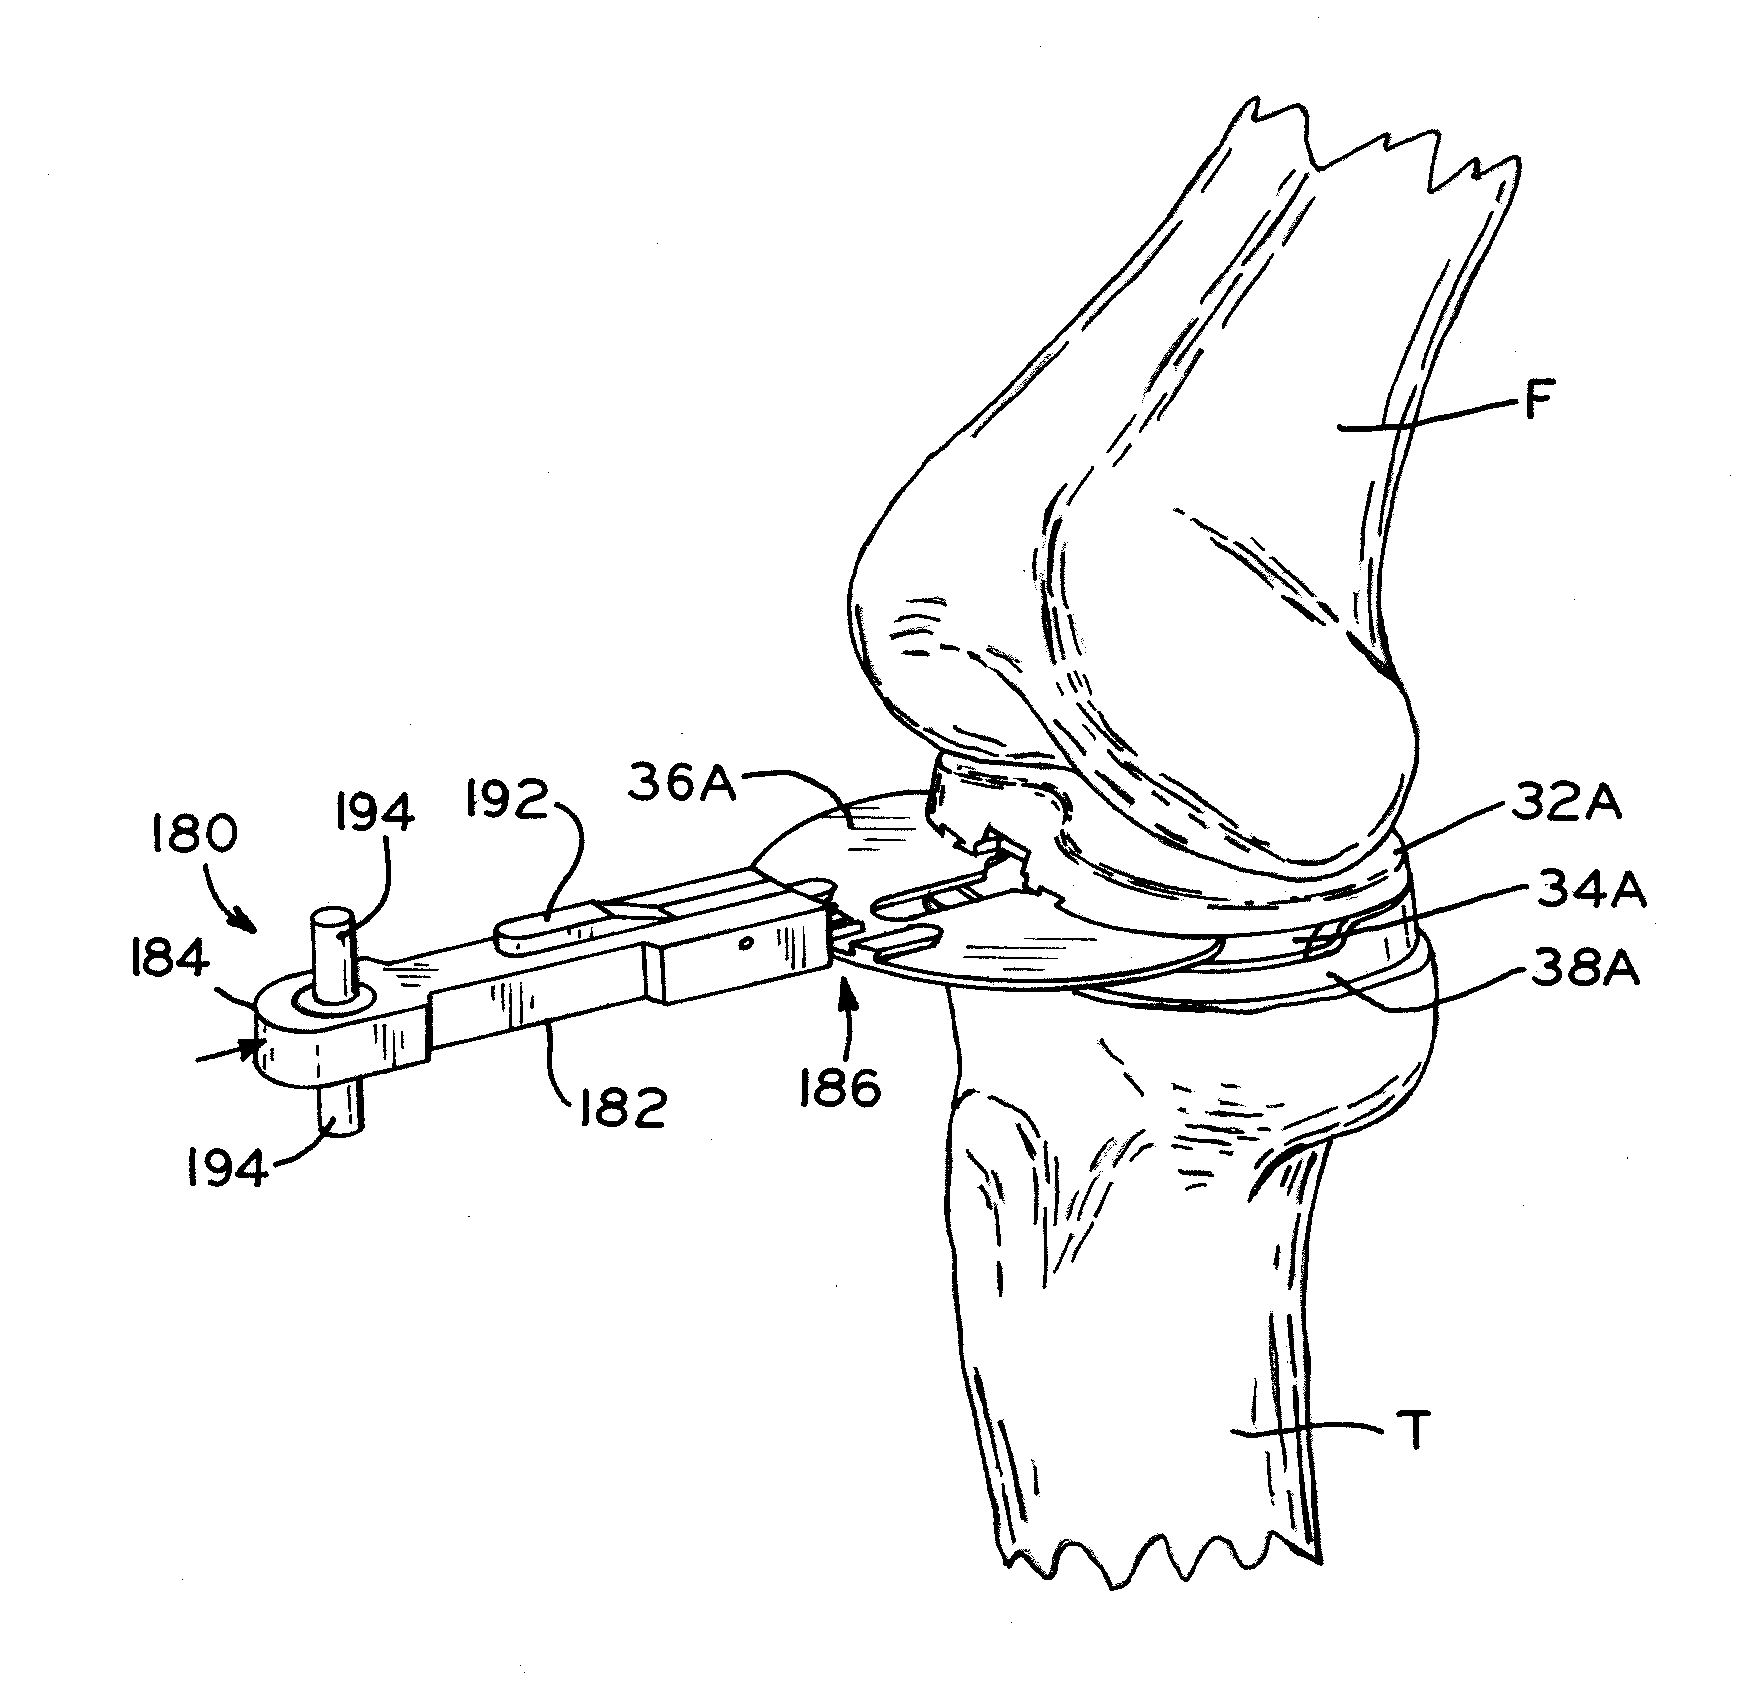 Provisional tibial prosthesis system